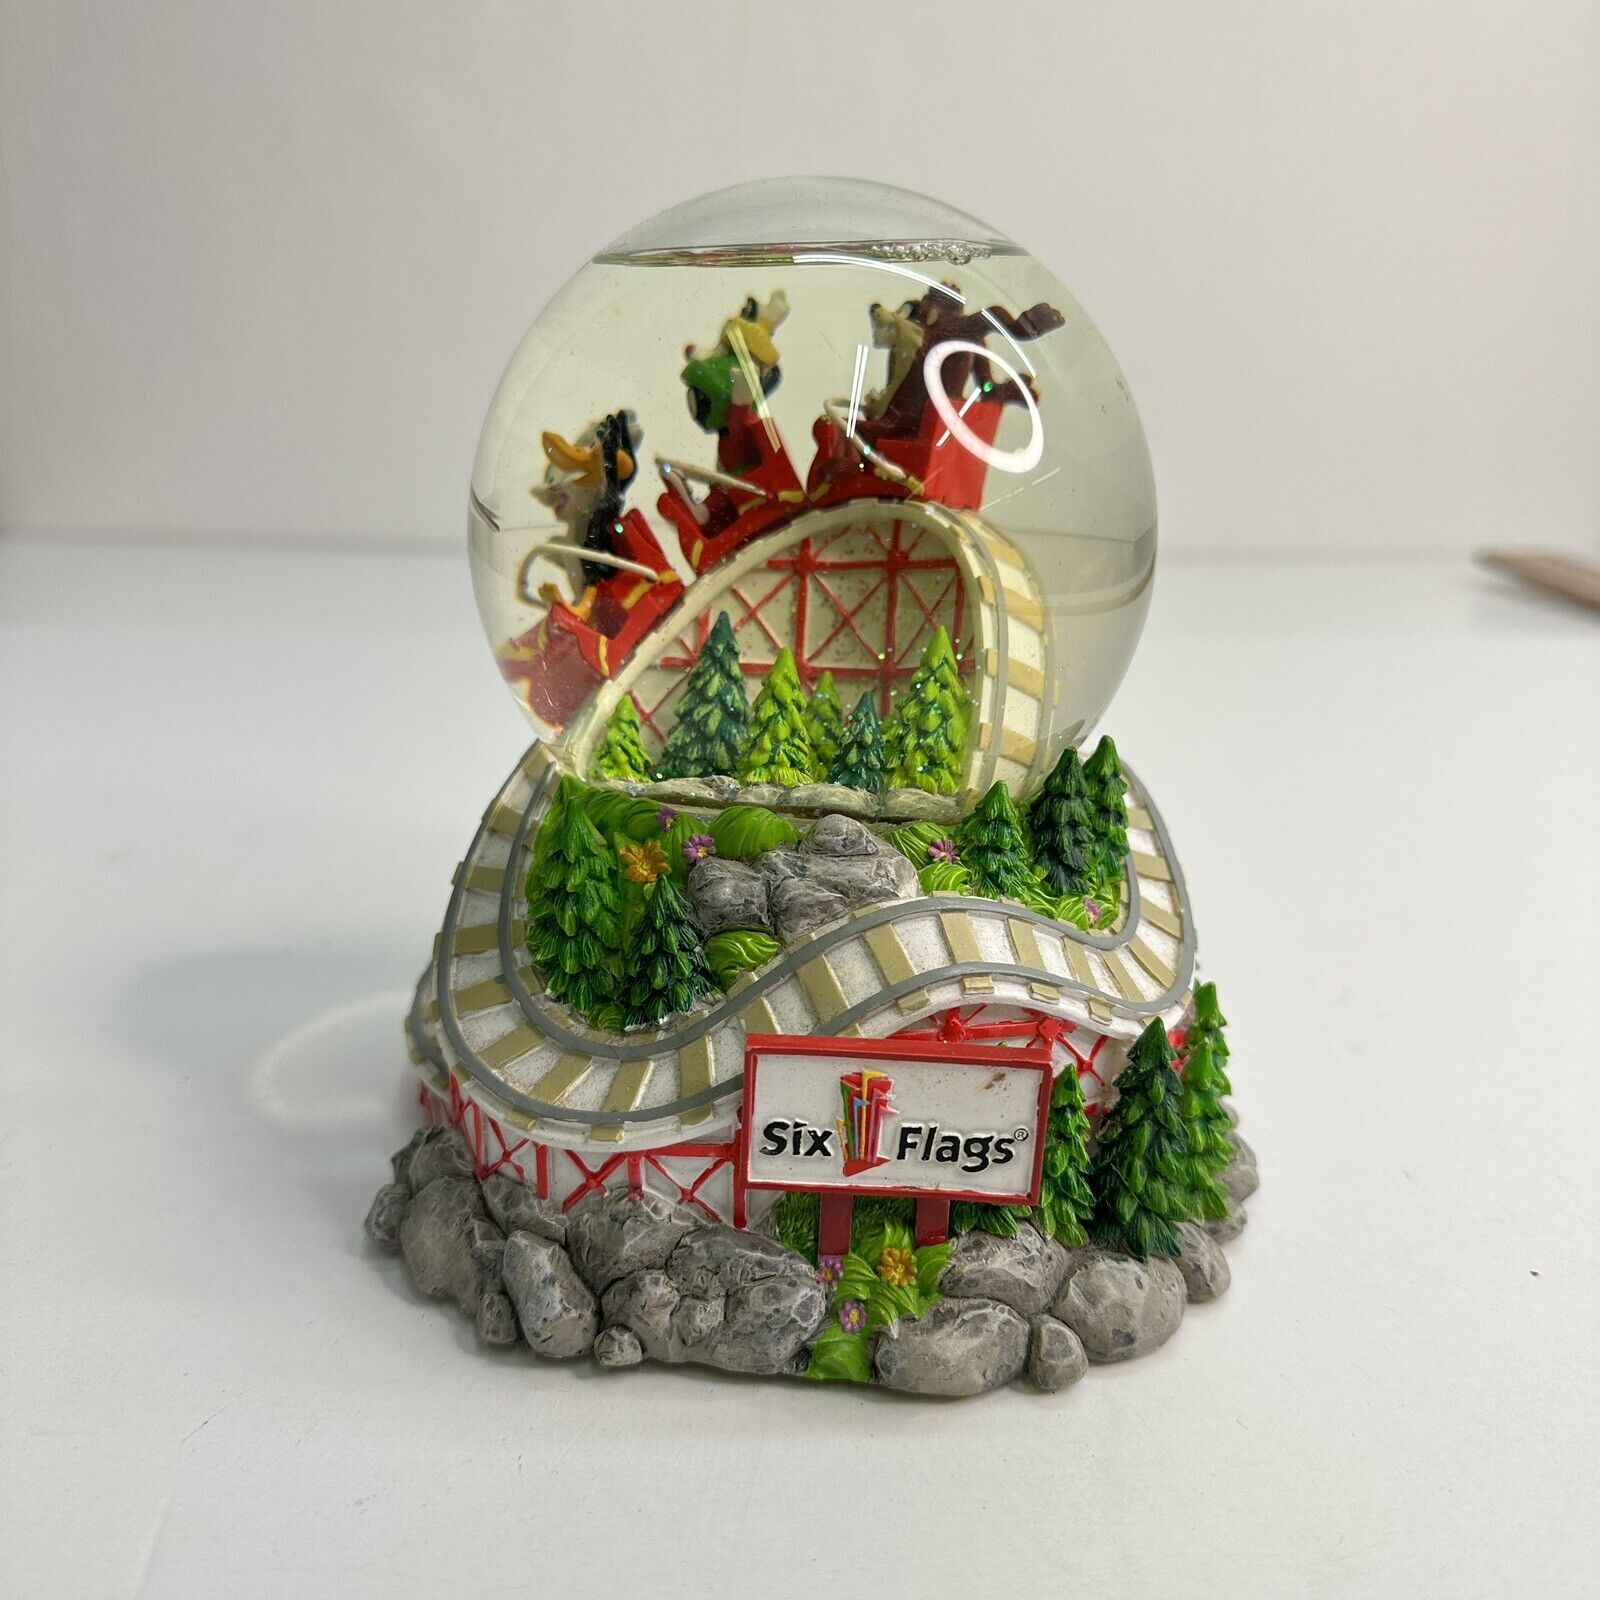 Six Flags Looney Tunes Roller Coaster Snowglobe Bugs Taz Daffy Marvin Sylvester